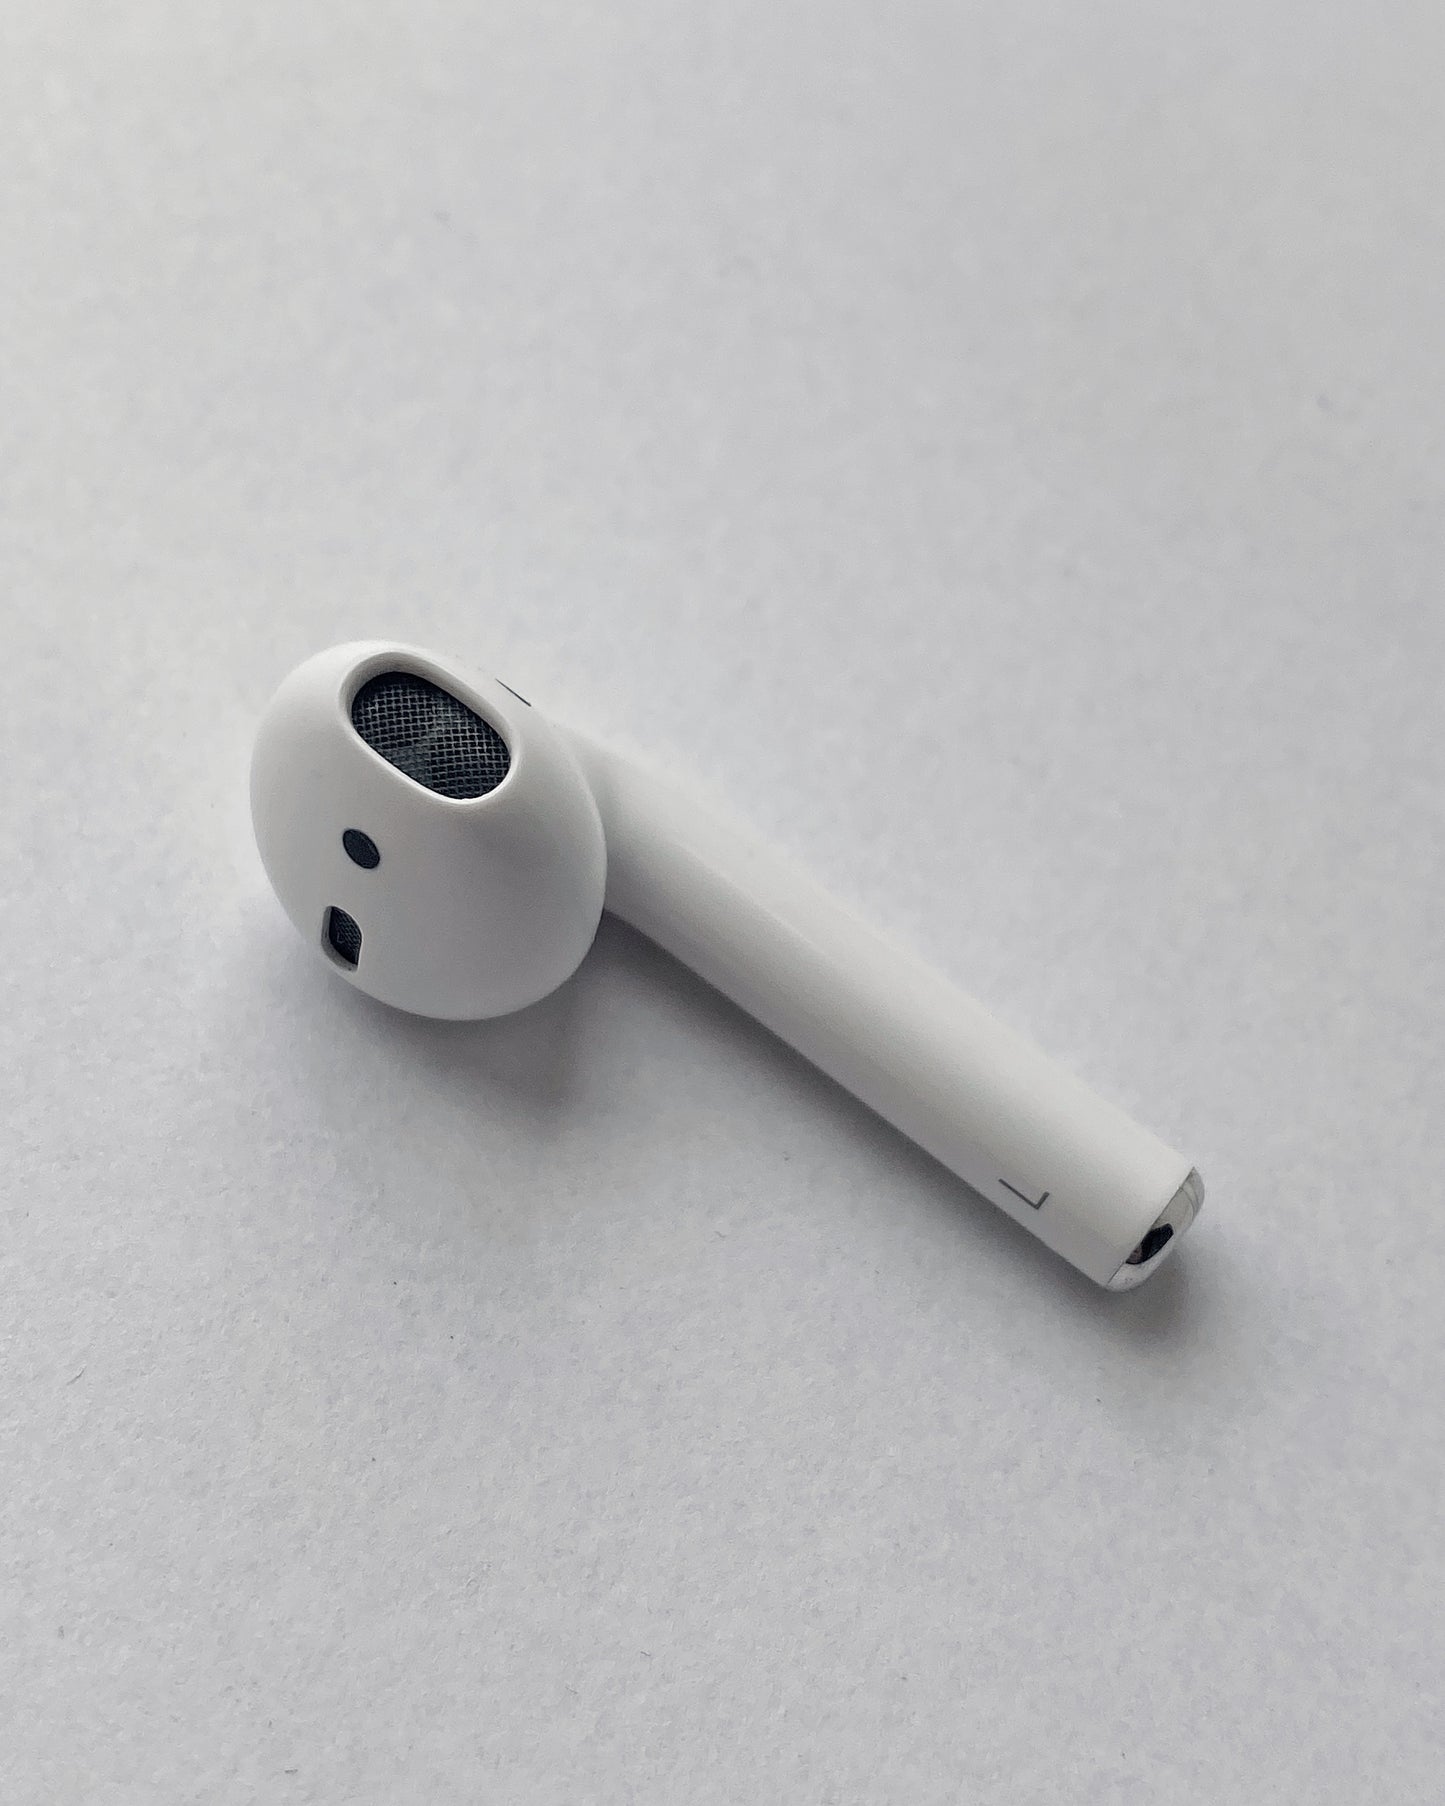 Apple AirPods 2. Generation links (A2031) refurbished